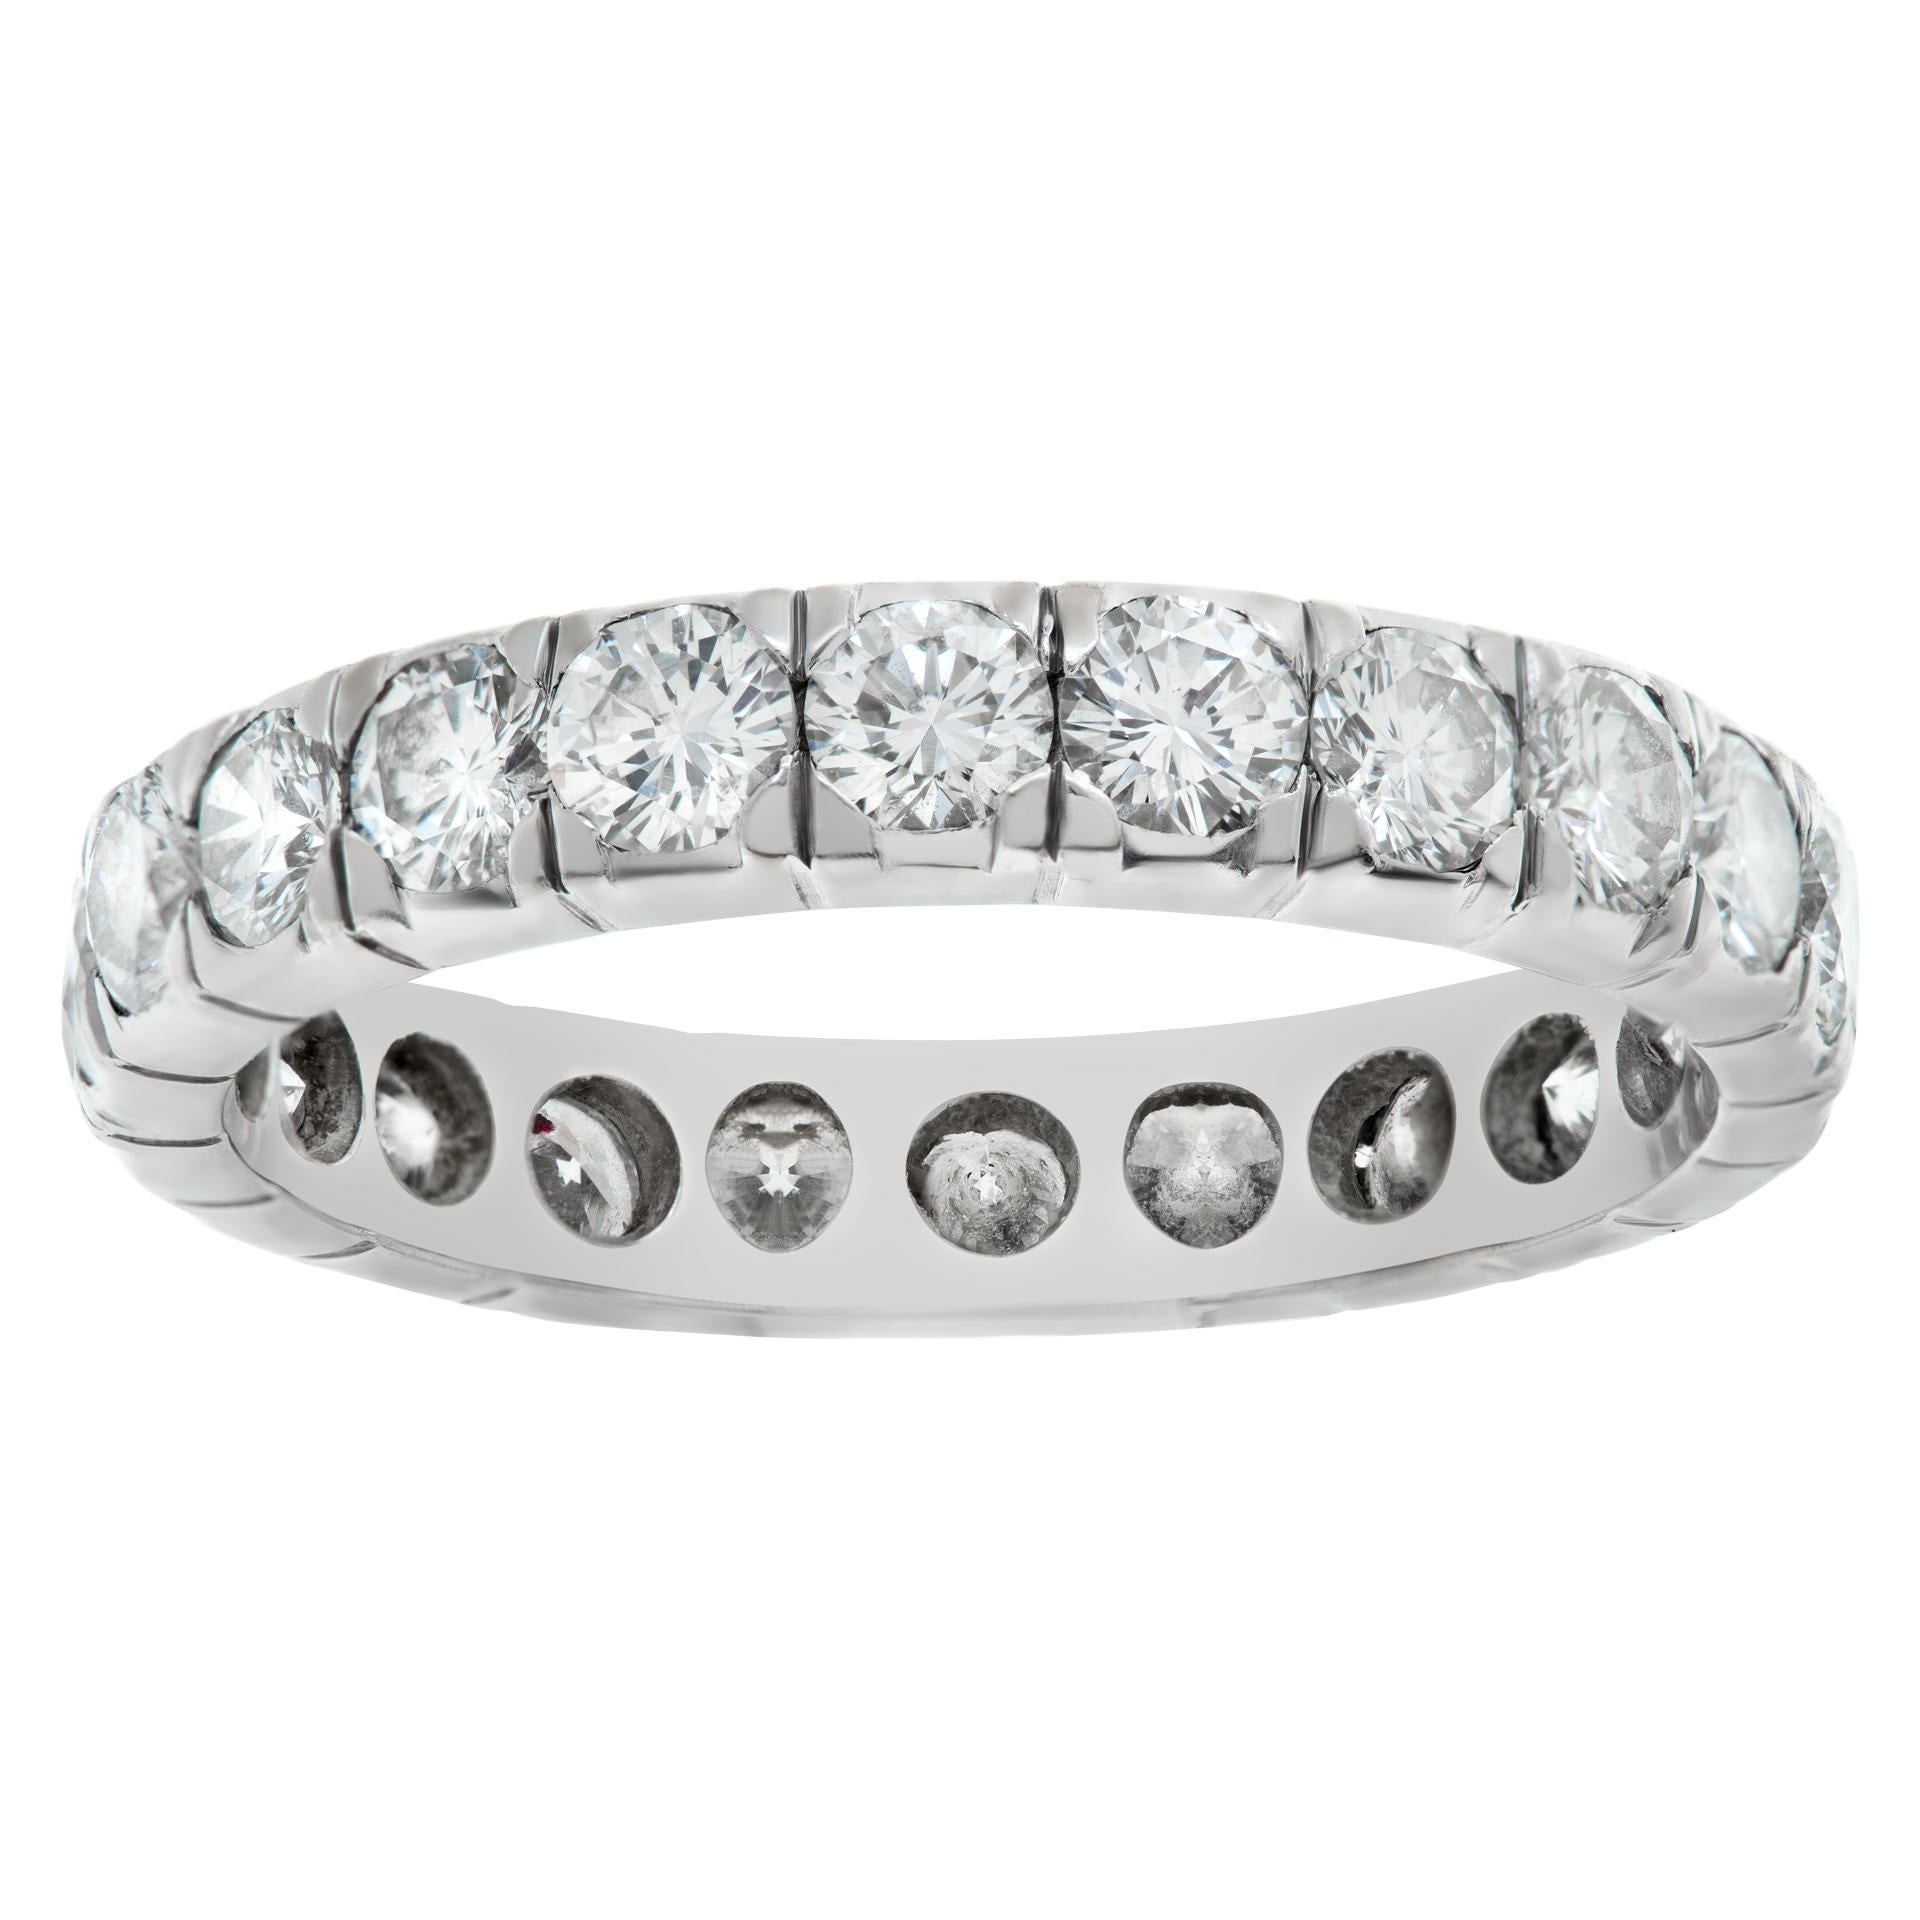 White gold eternity band w/ approx. 1.5 cts in G-H Color, VS Clarity diamonds For Sale